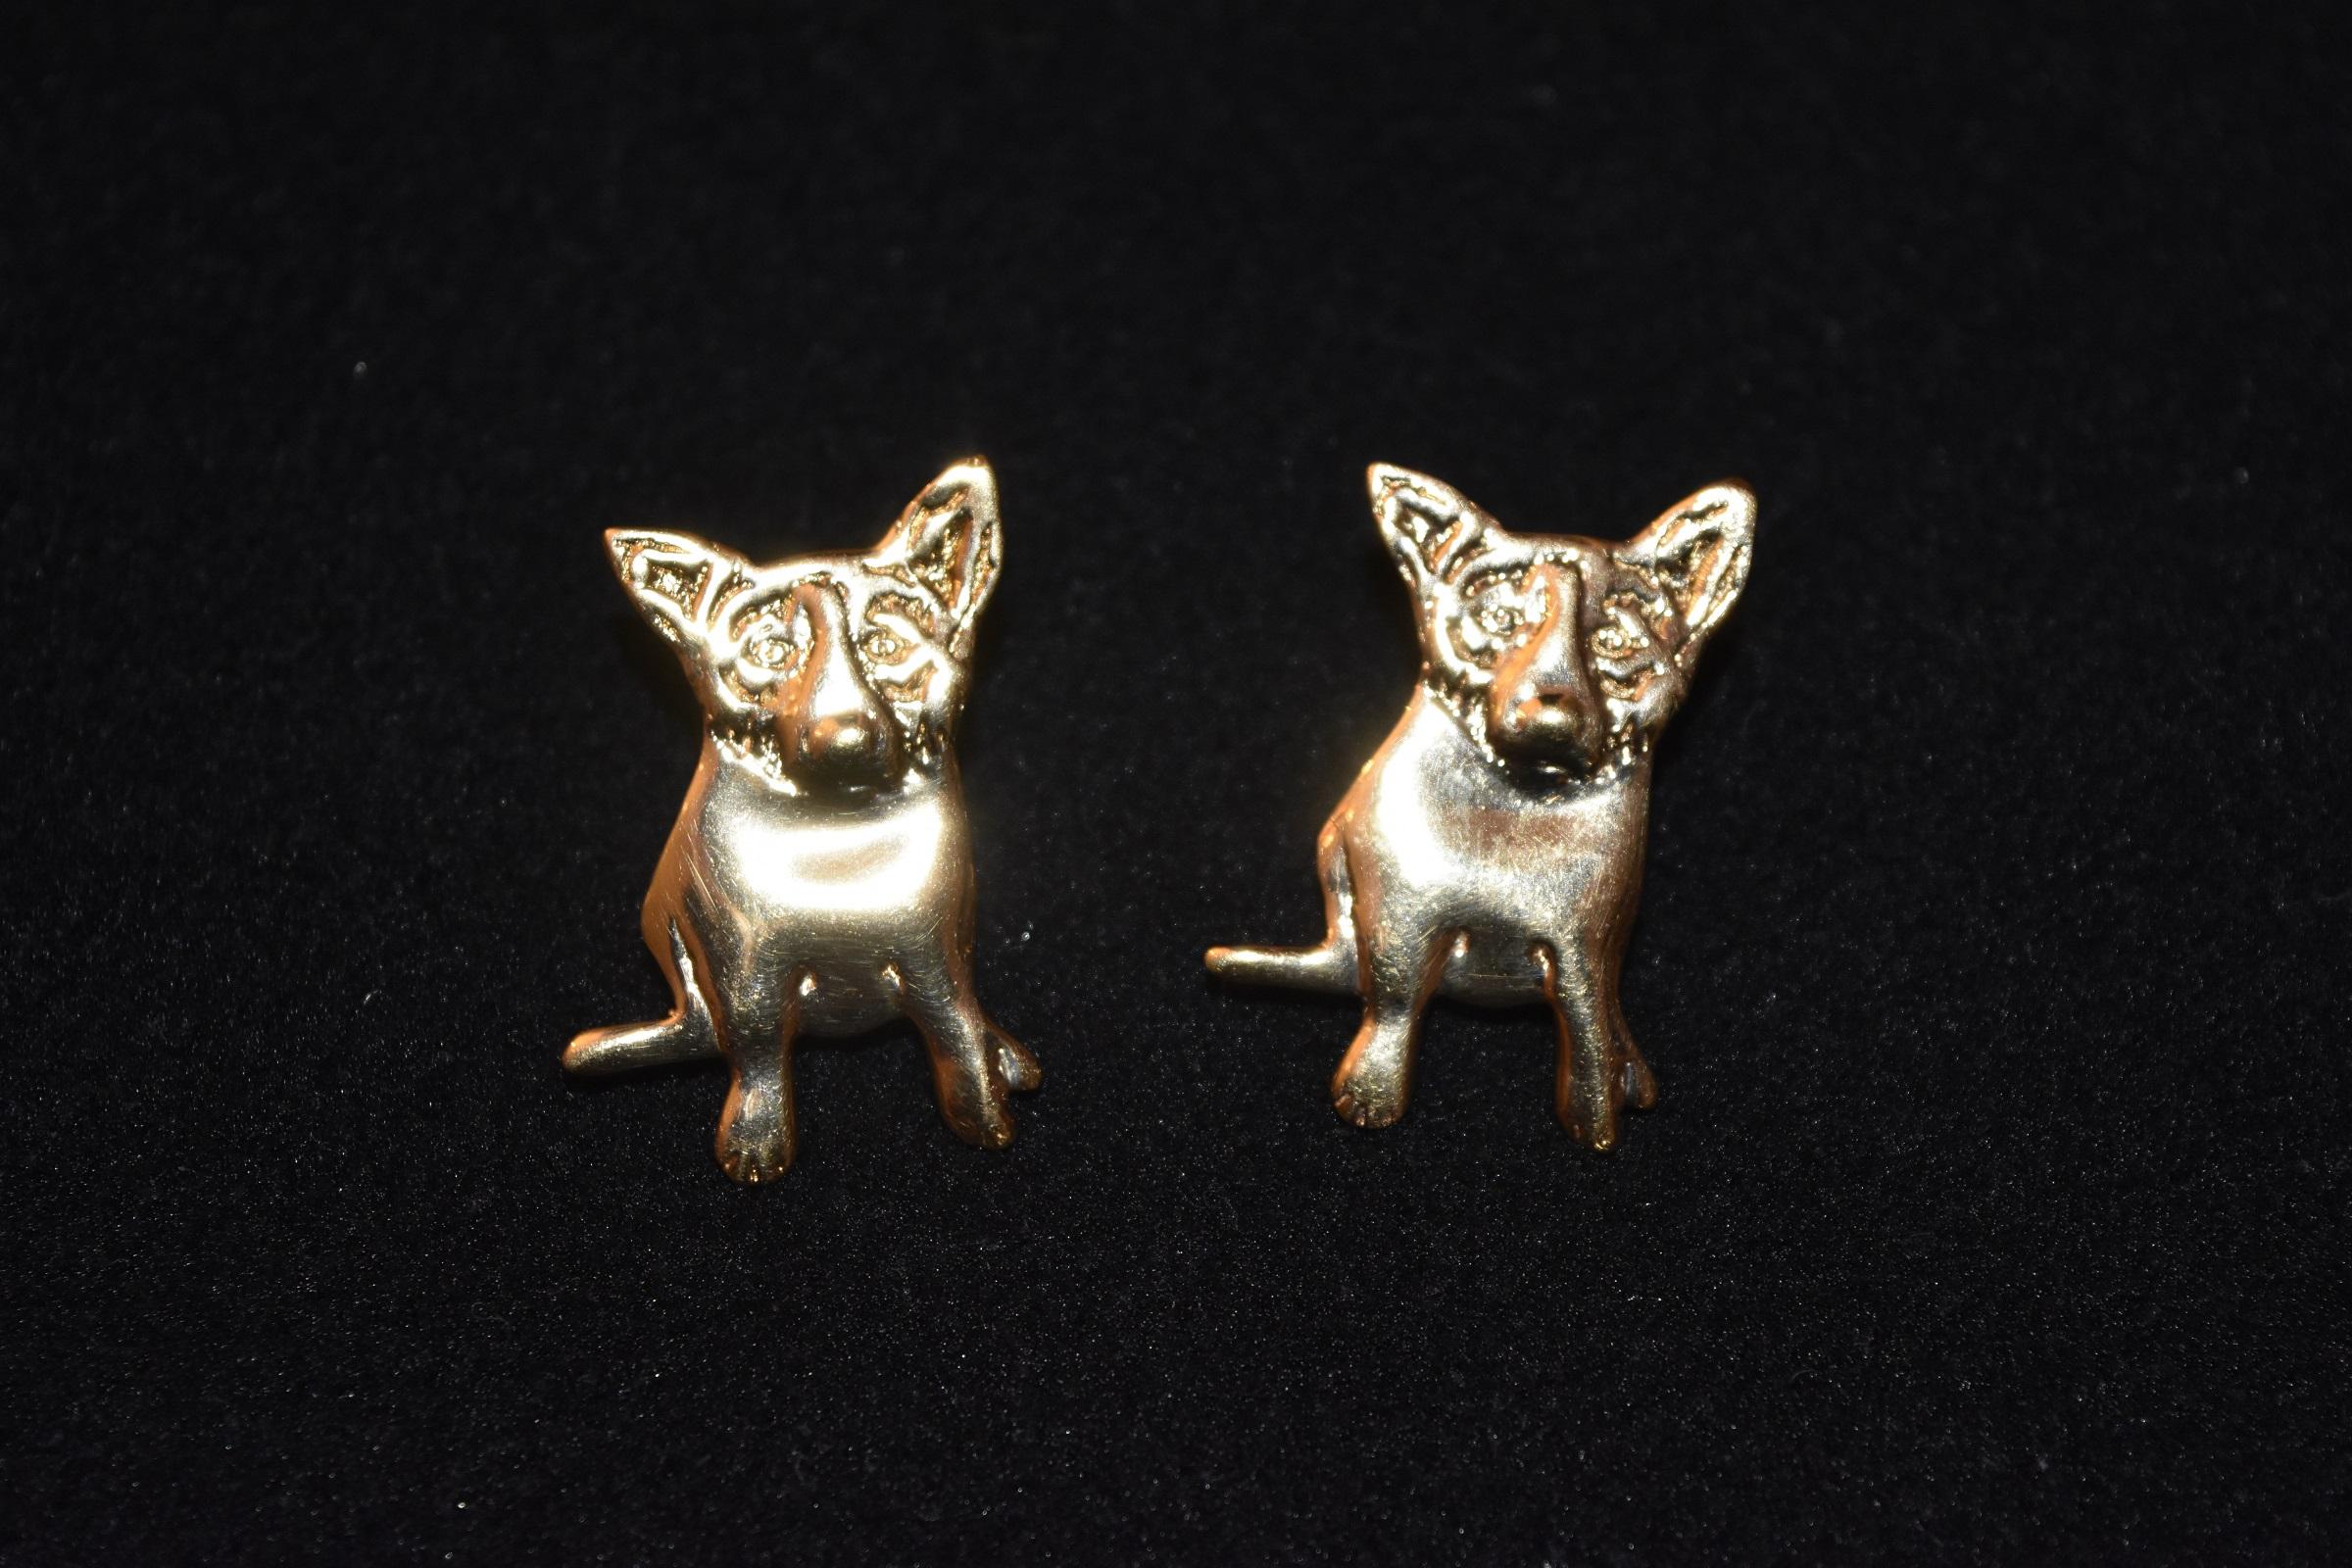 Blue Dog Sterling/Gold Plated Pierced Earrings w/@Rodrigue & "Sterling" on back - Art by George Rodrigue